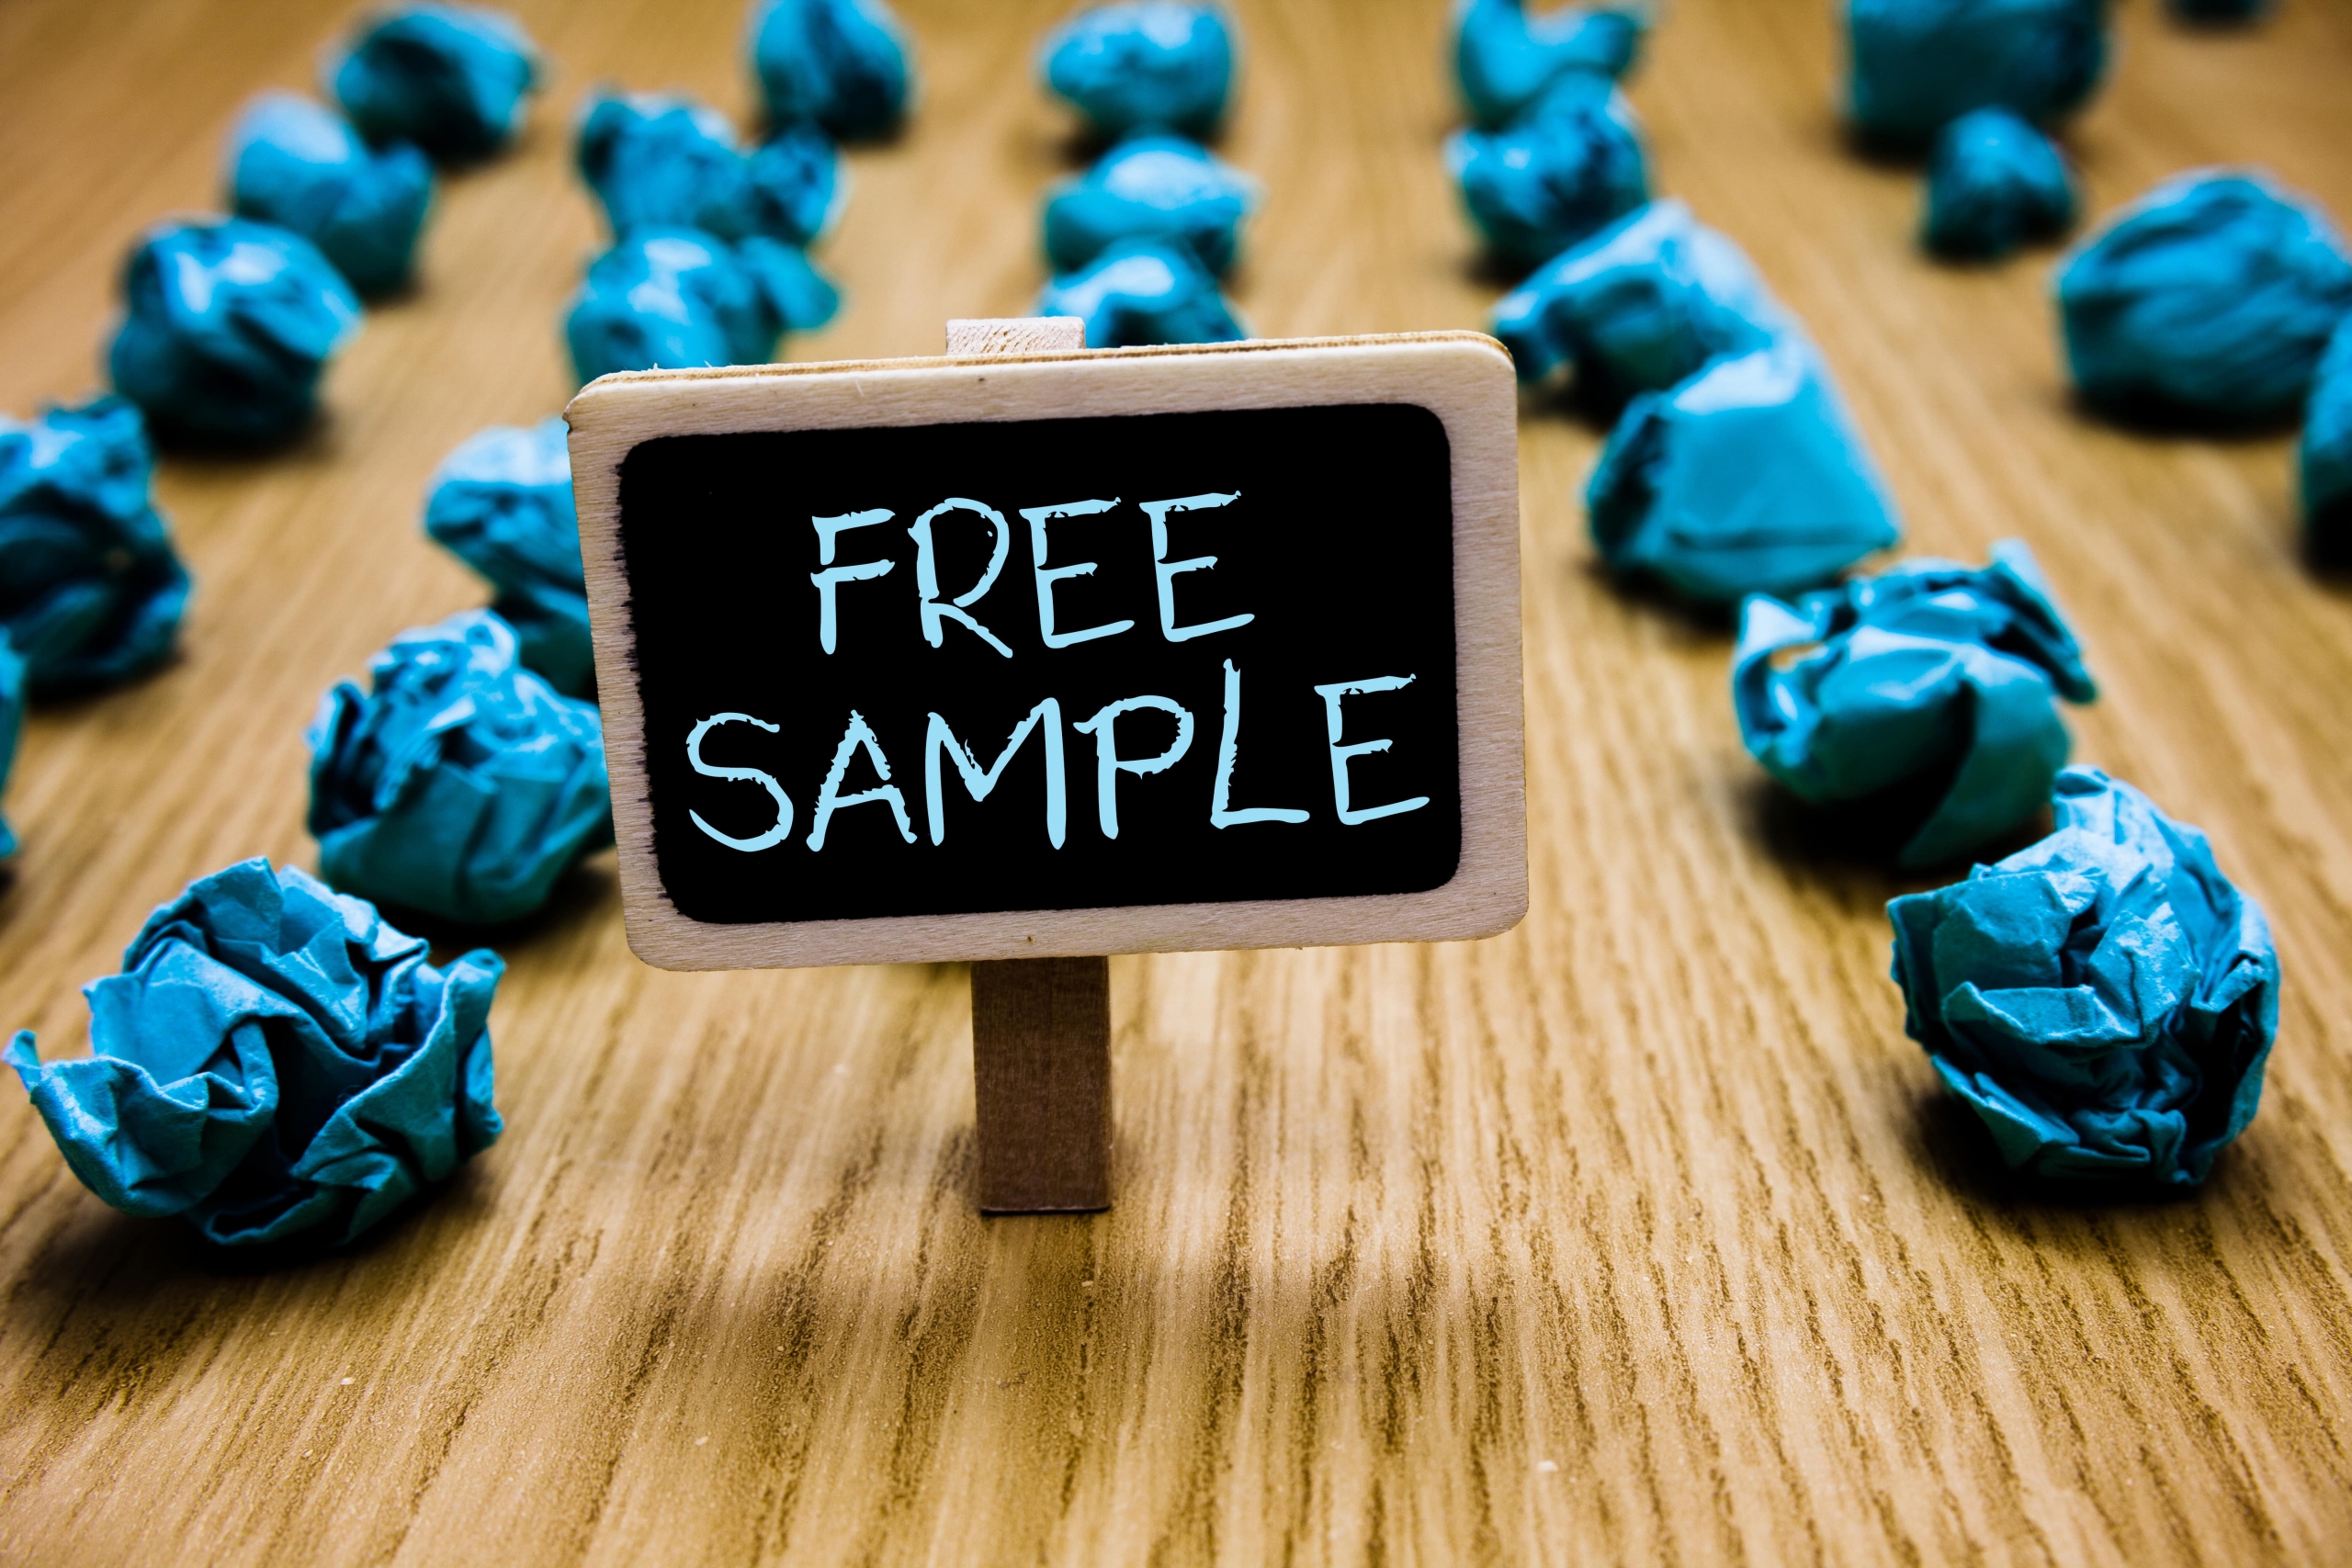 Free Sample featured